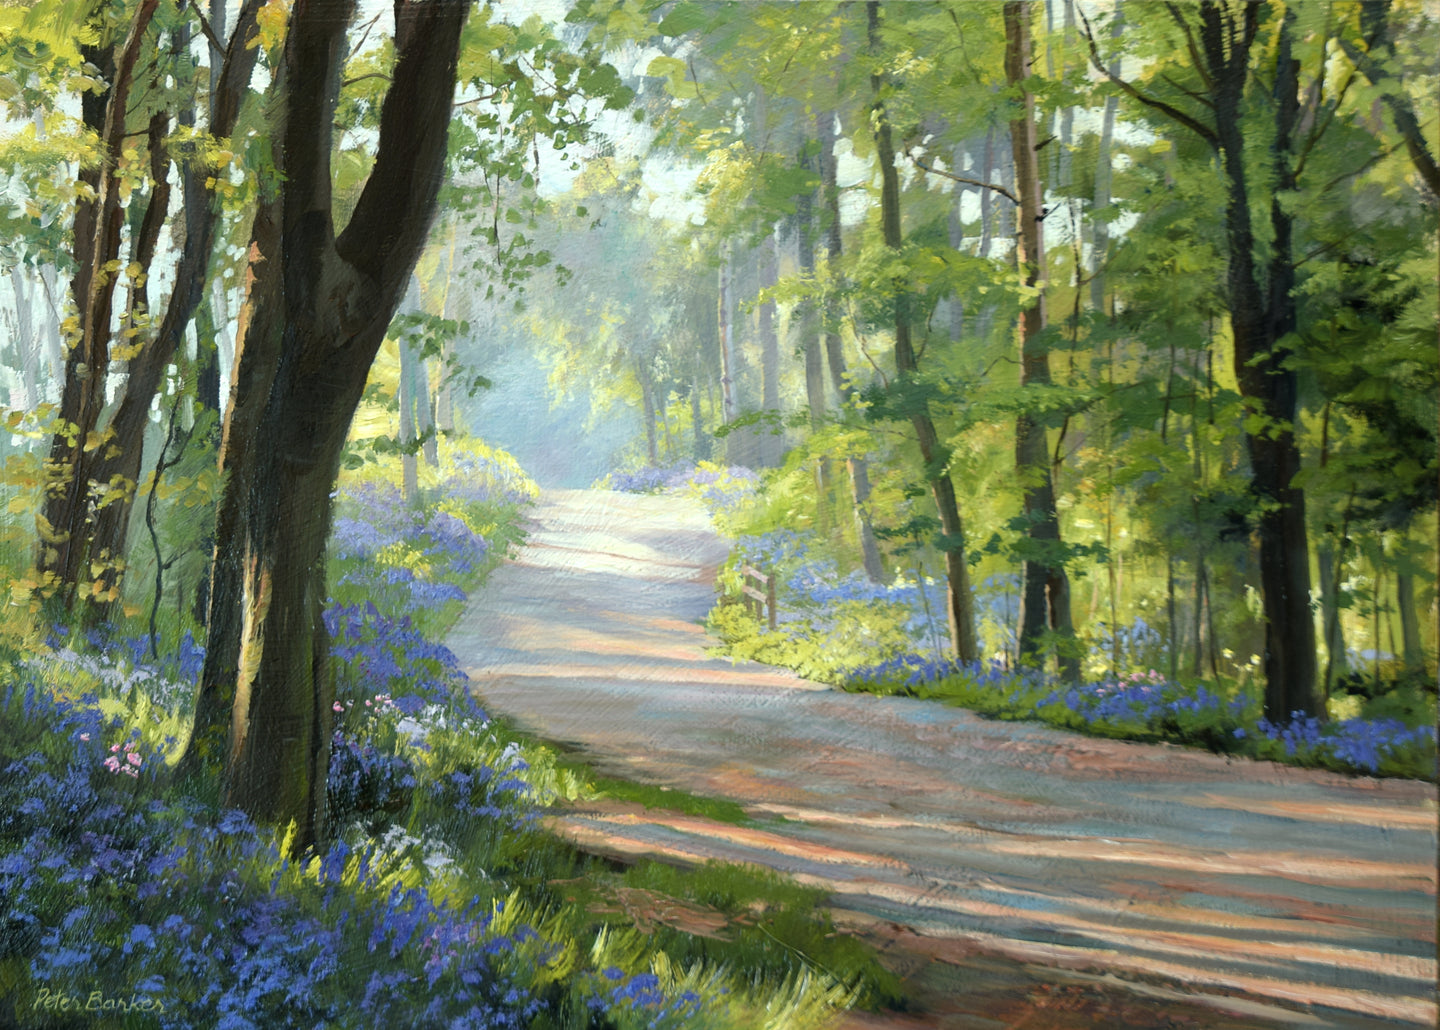 10 x 14 inch oil painting of the path through Barnsdale Wood, looking into the sunlight, trees appearing dark, with a sparkle of lit vegetation and foliage, with lots of Bluebells abounding.